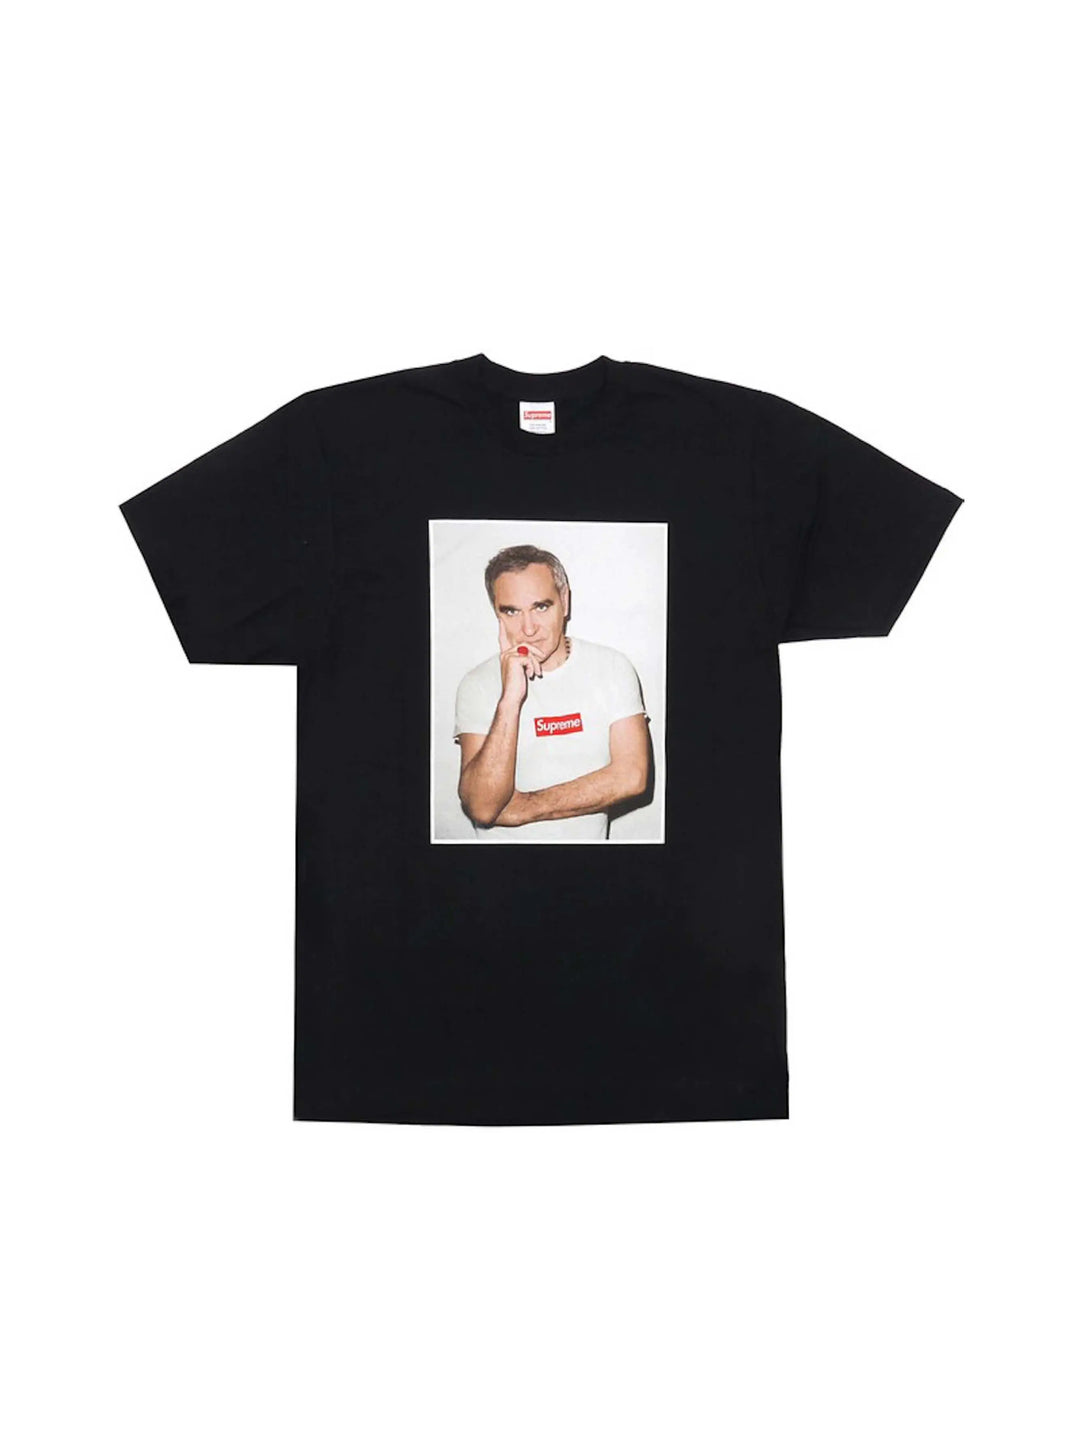 Supreme Morrissey Tee Black in Auckland, New Zealand - Shop name